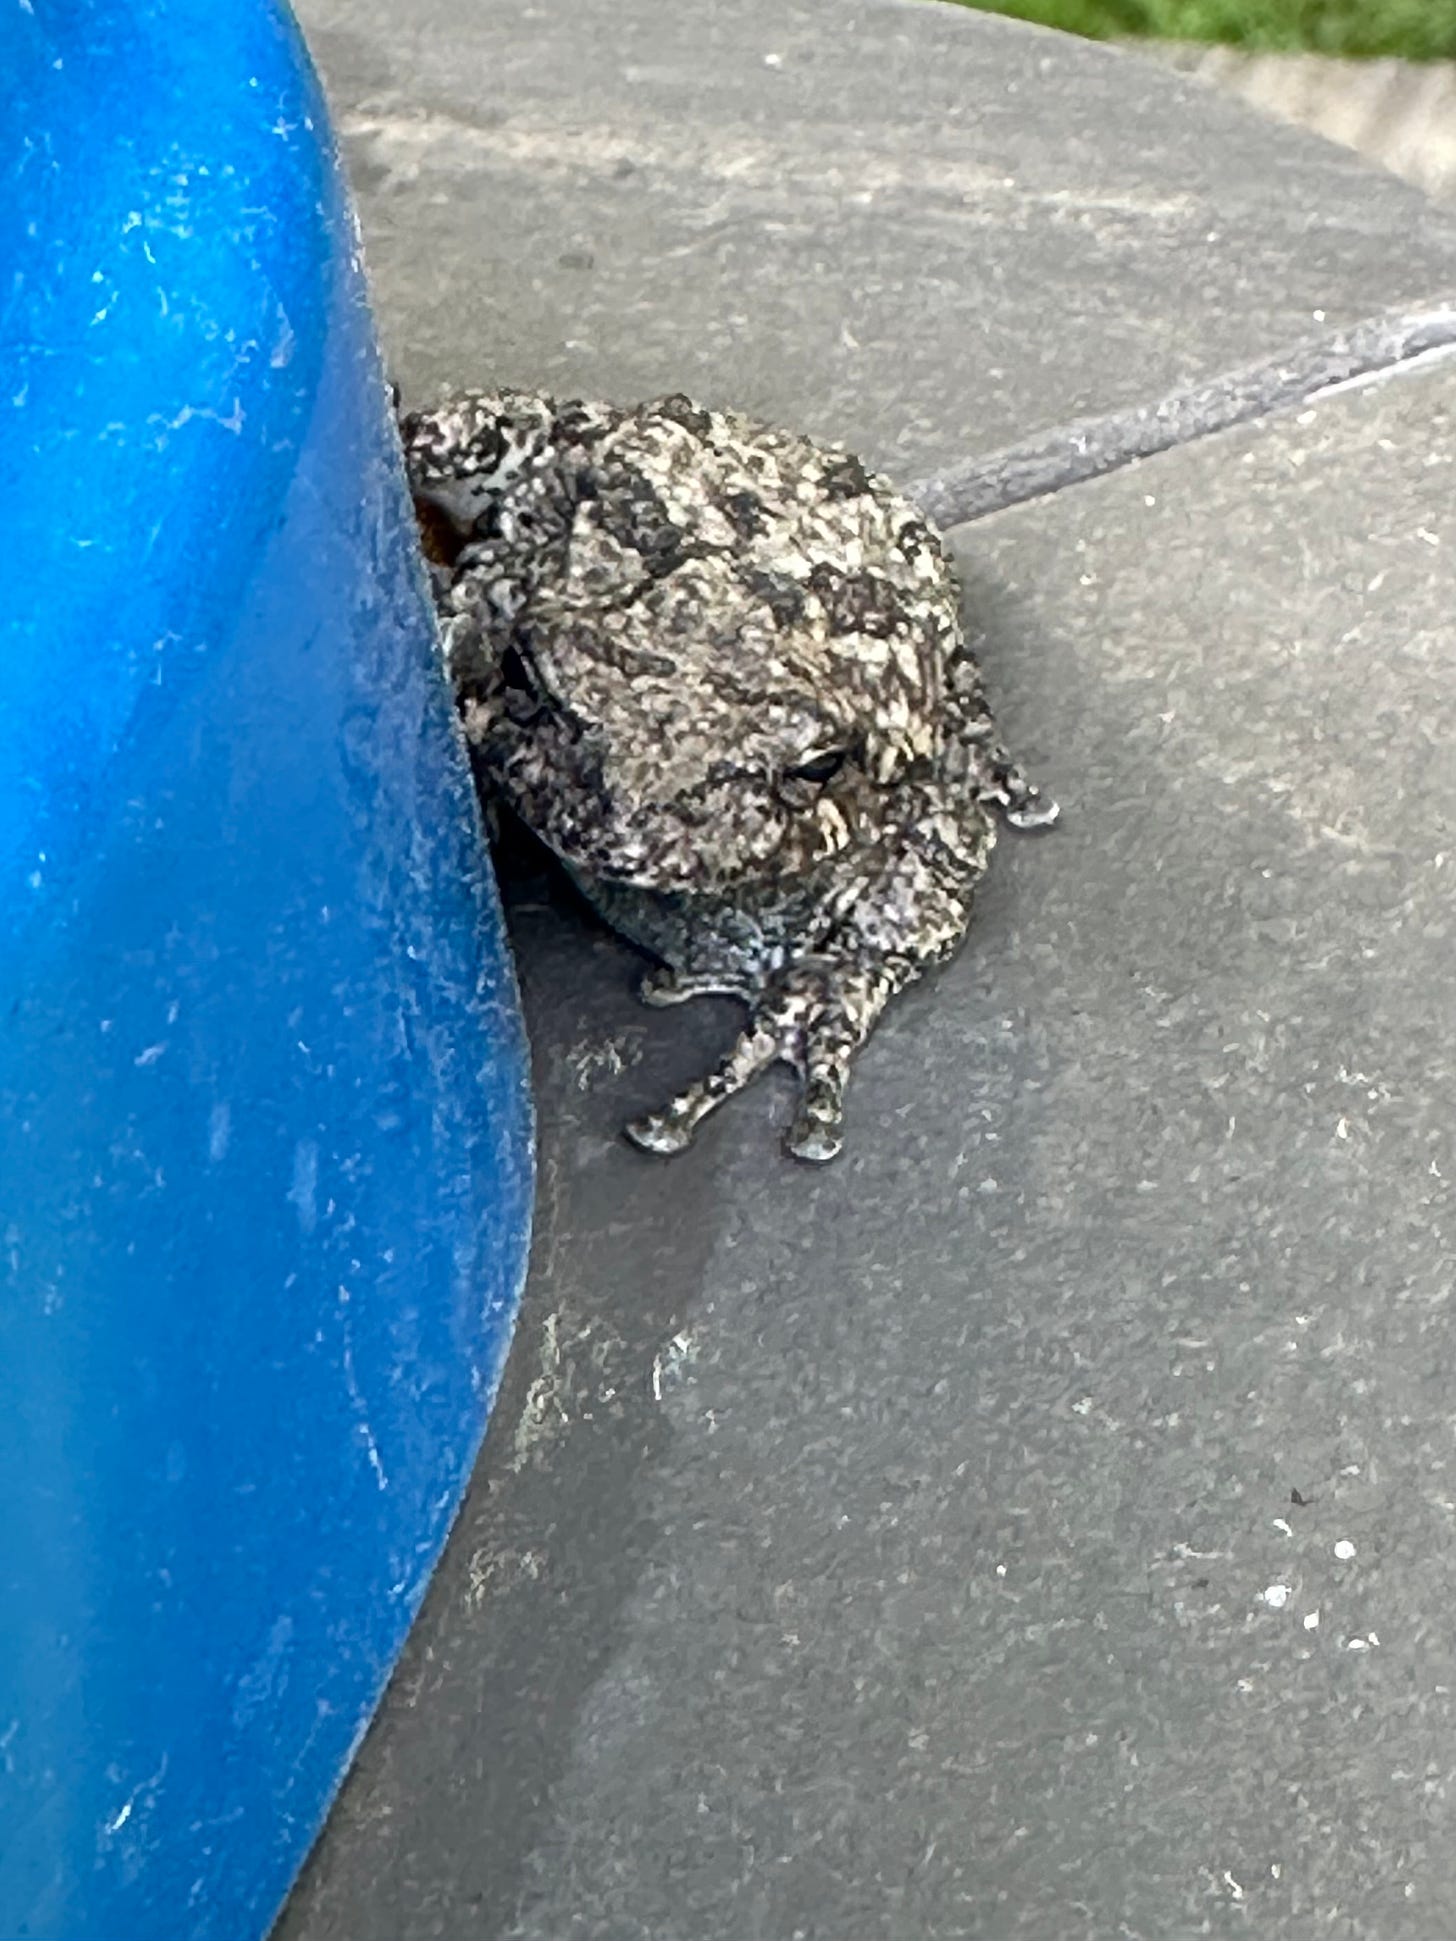 A toad blends in with concrete.